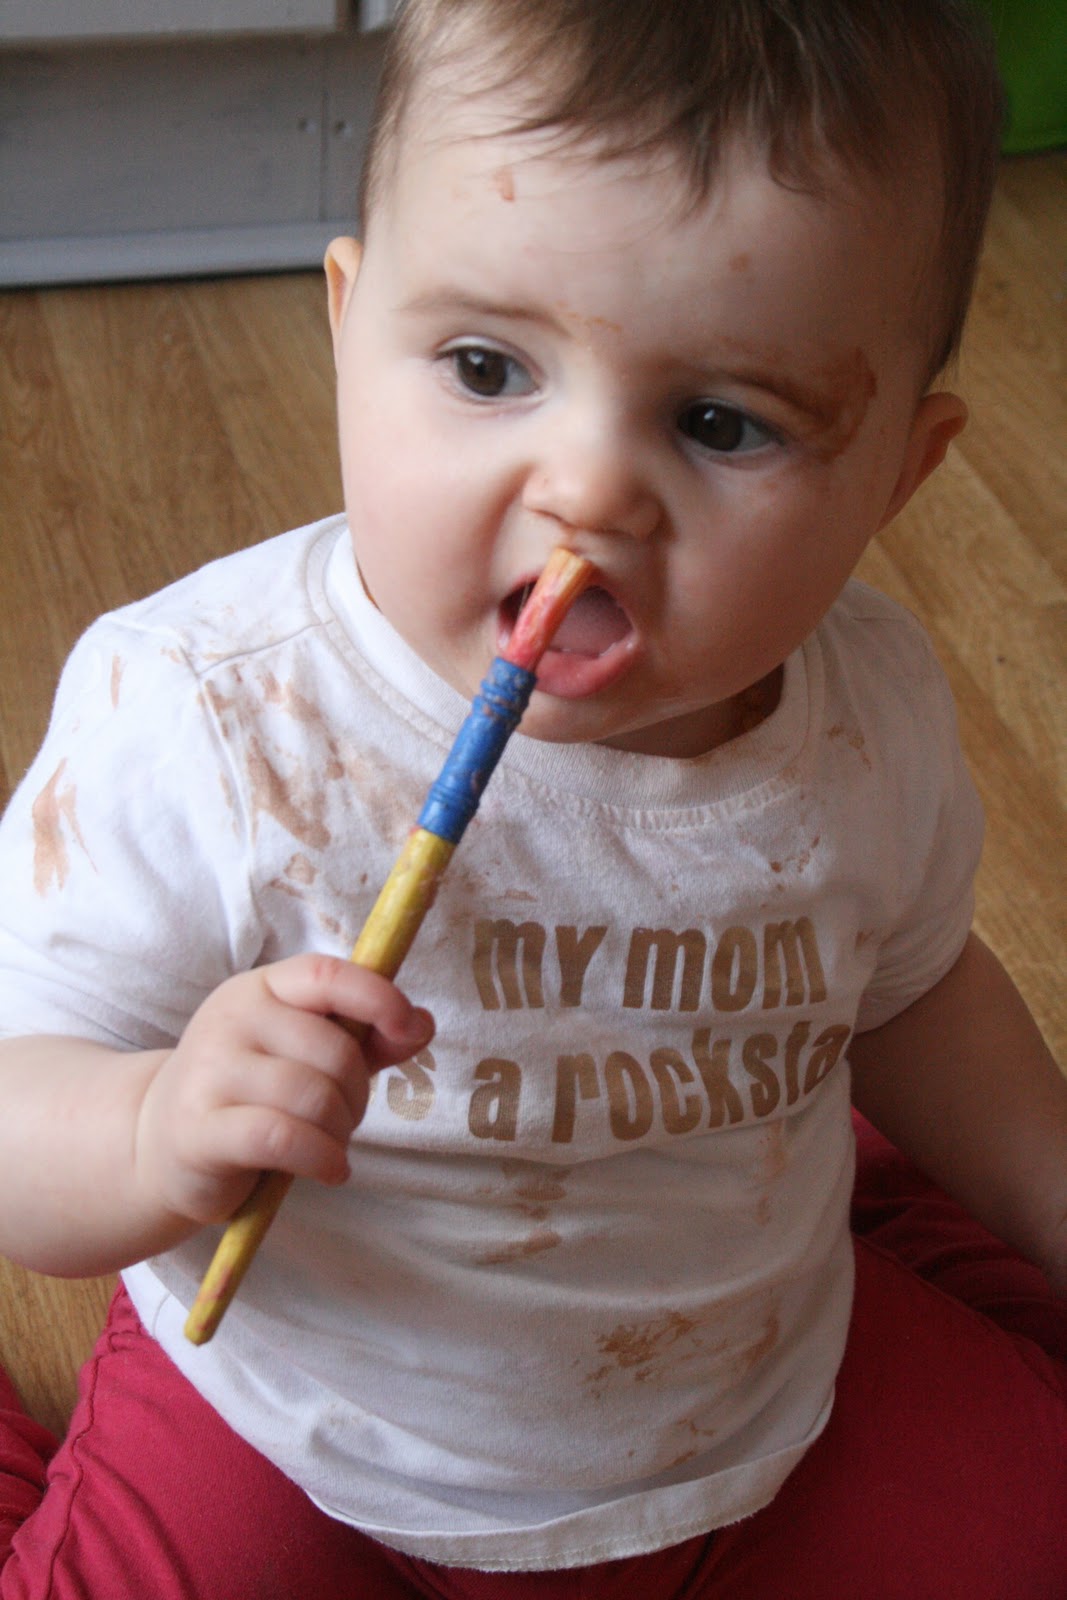 Edible Yogurt Finger Paint for Babies & Toddlers - The Default Cook